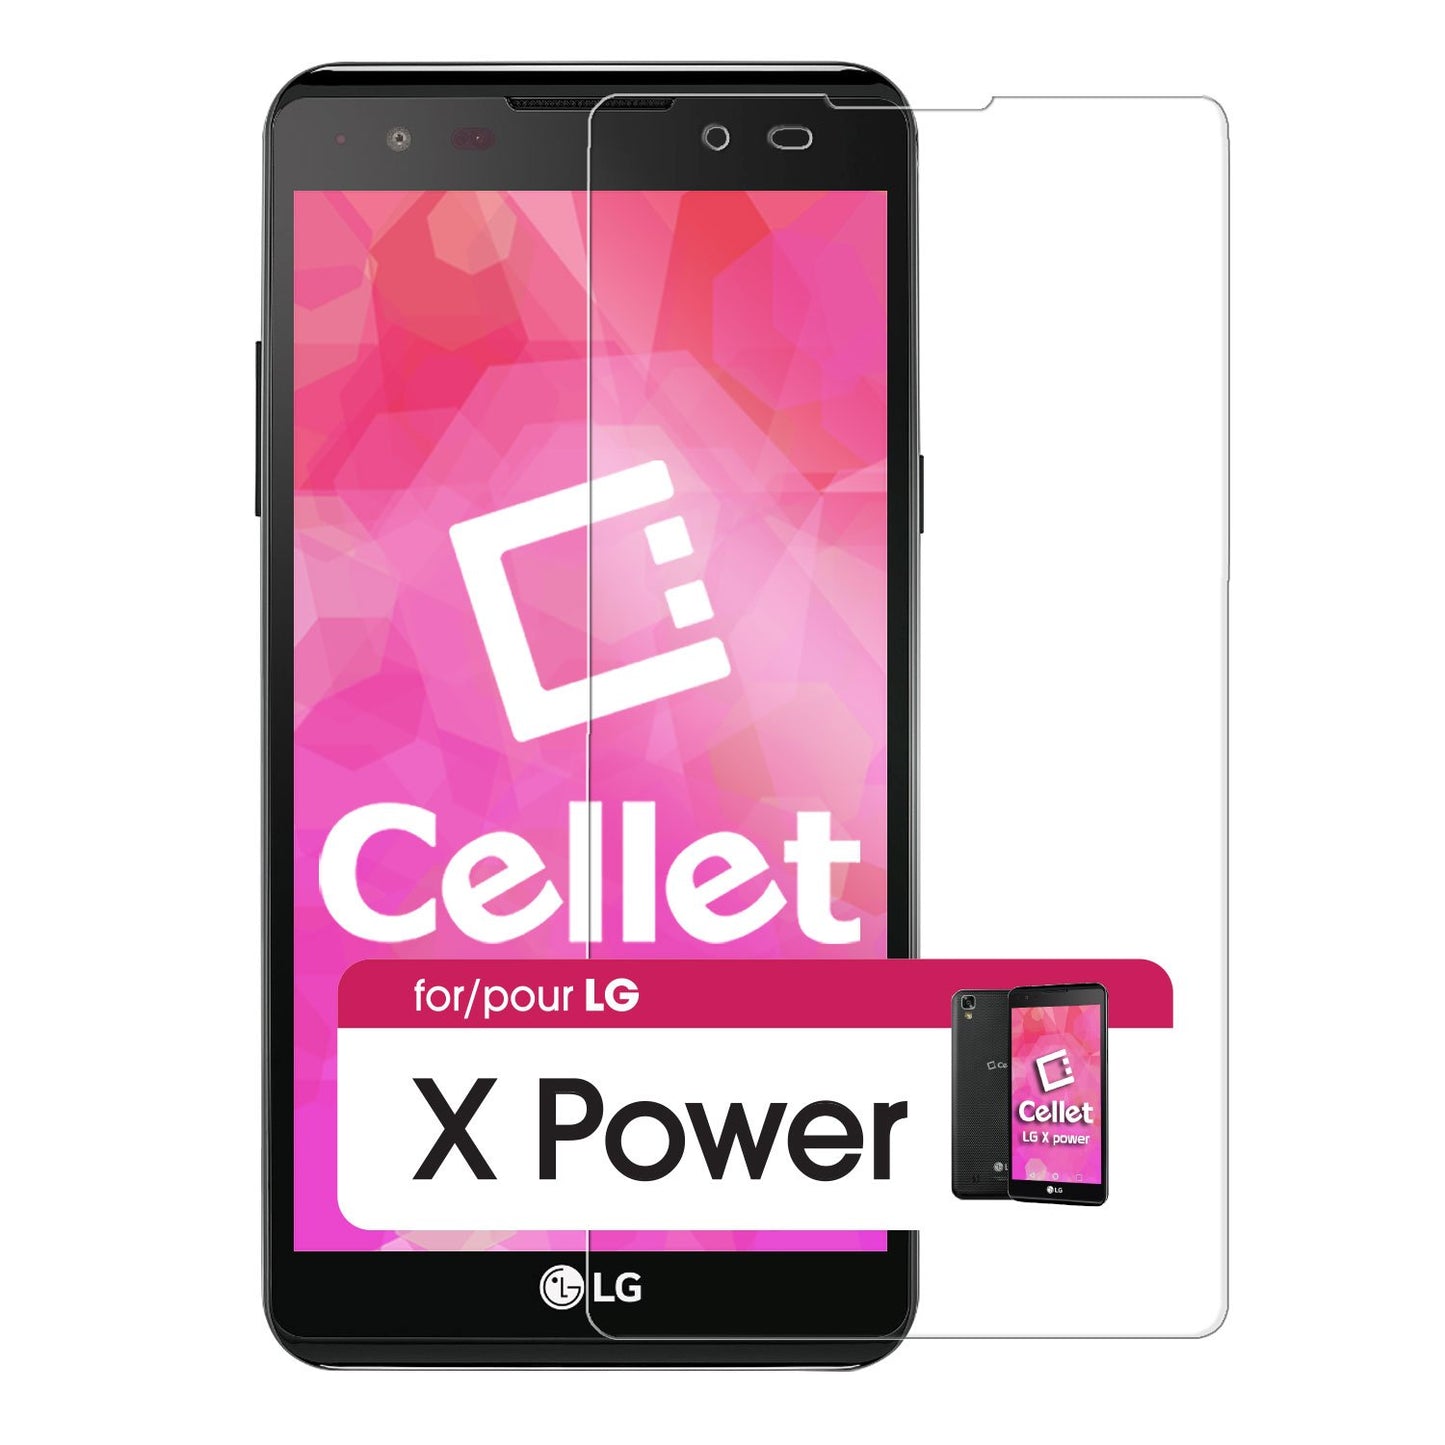 SGLGXPOWE - Cellet 0.3mm Premium Tempered Glass Screen Protector for LG XPower (9H Hardness) - by Cellet